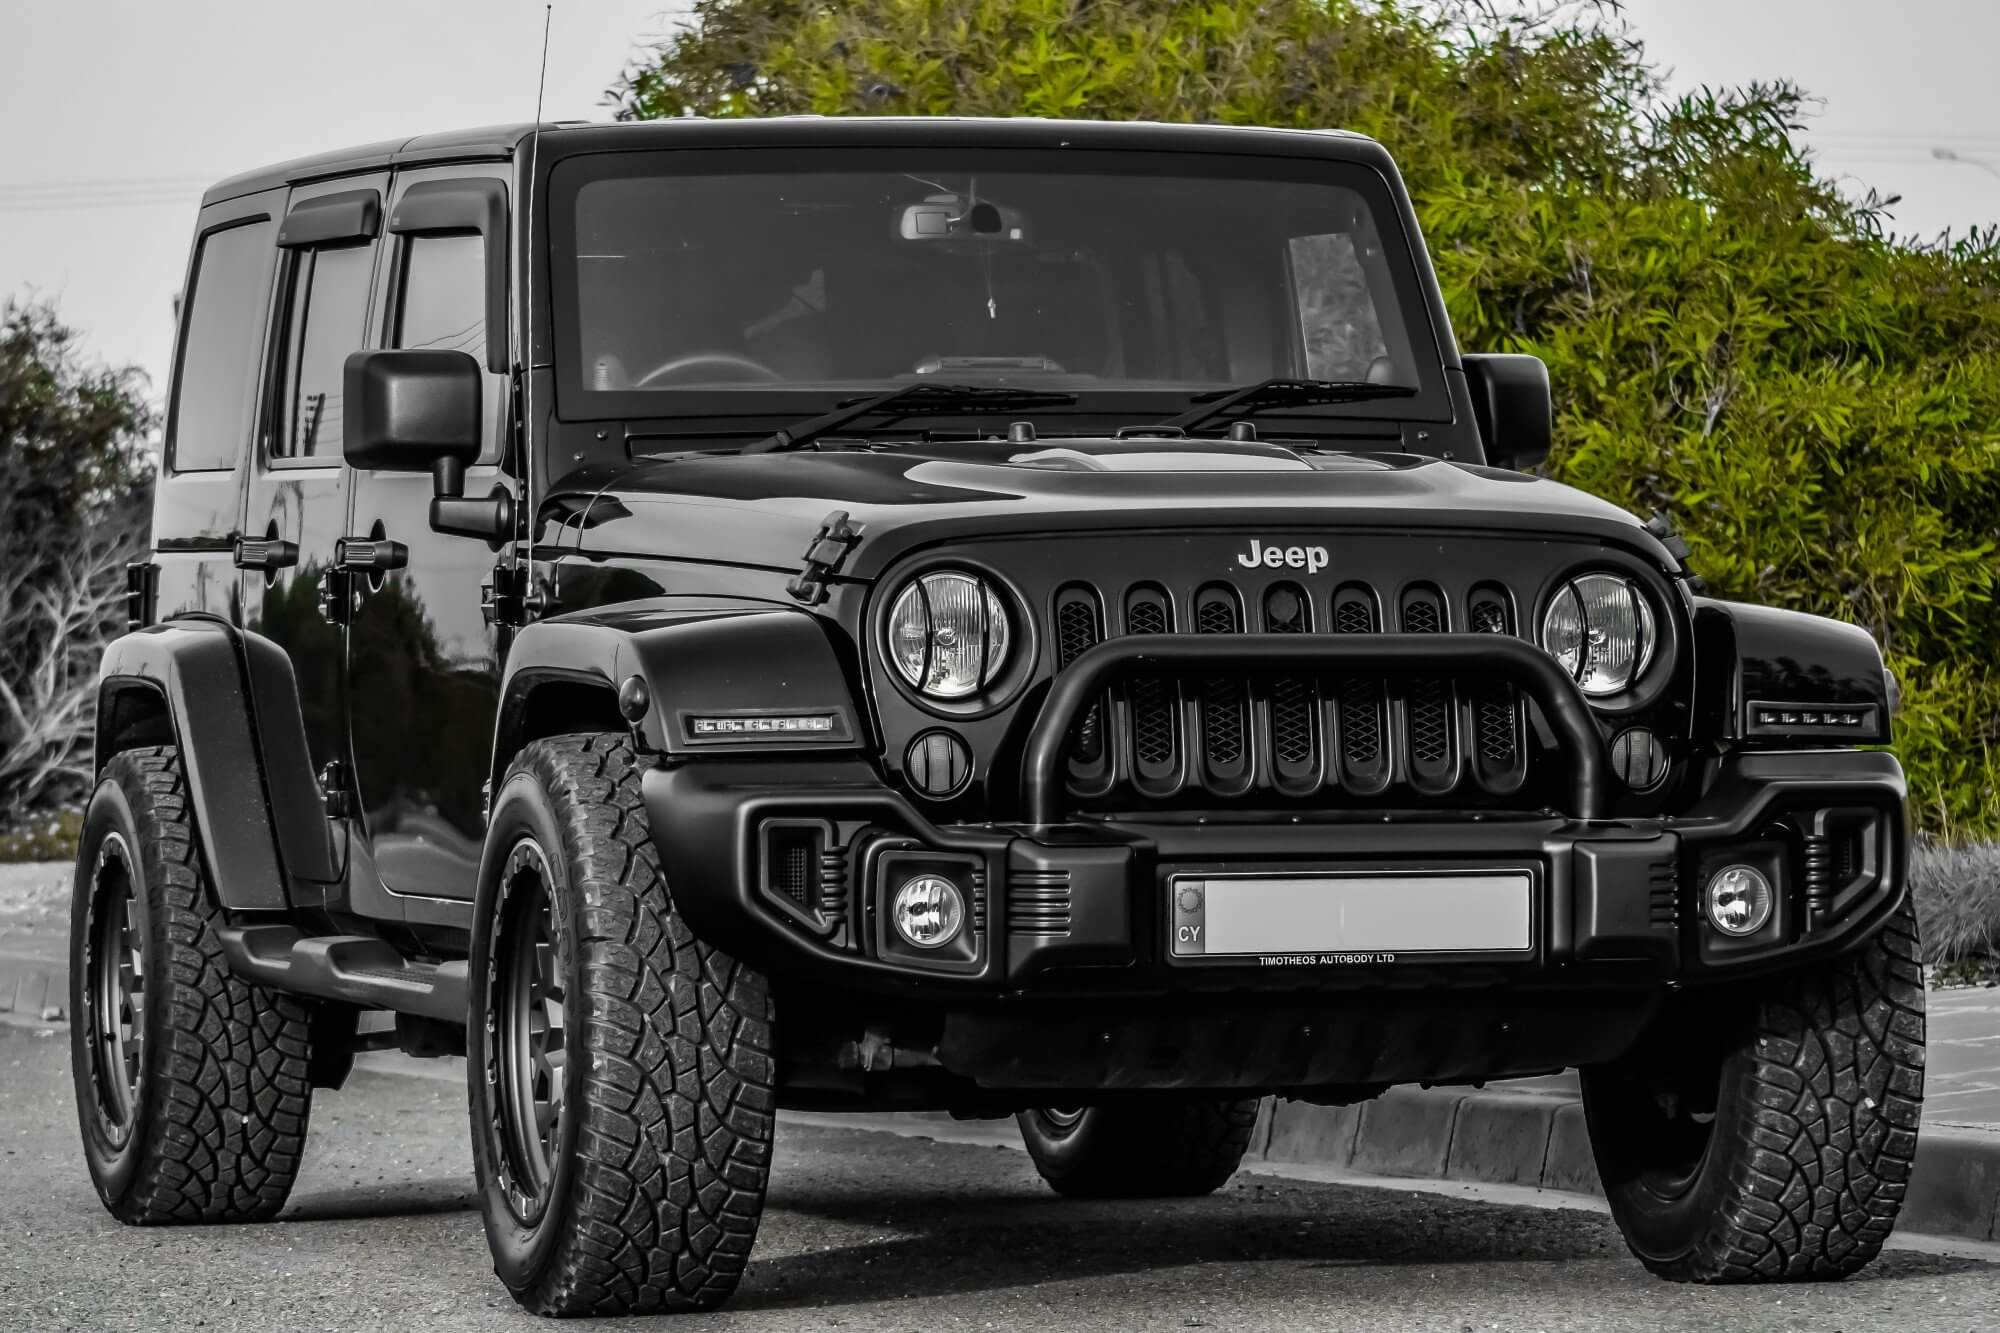 Do You Know How To Choose The Best Jeep Lift Kit For Your Jeep